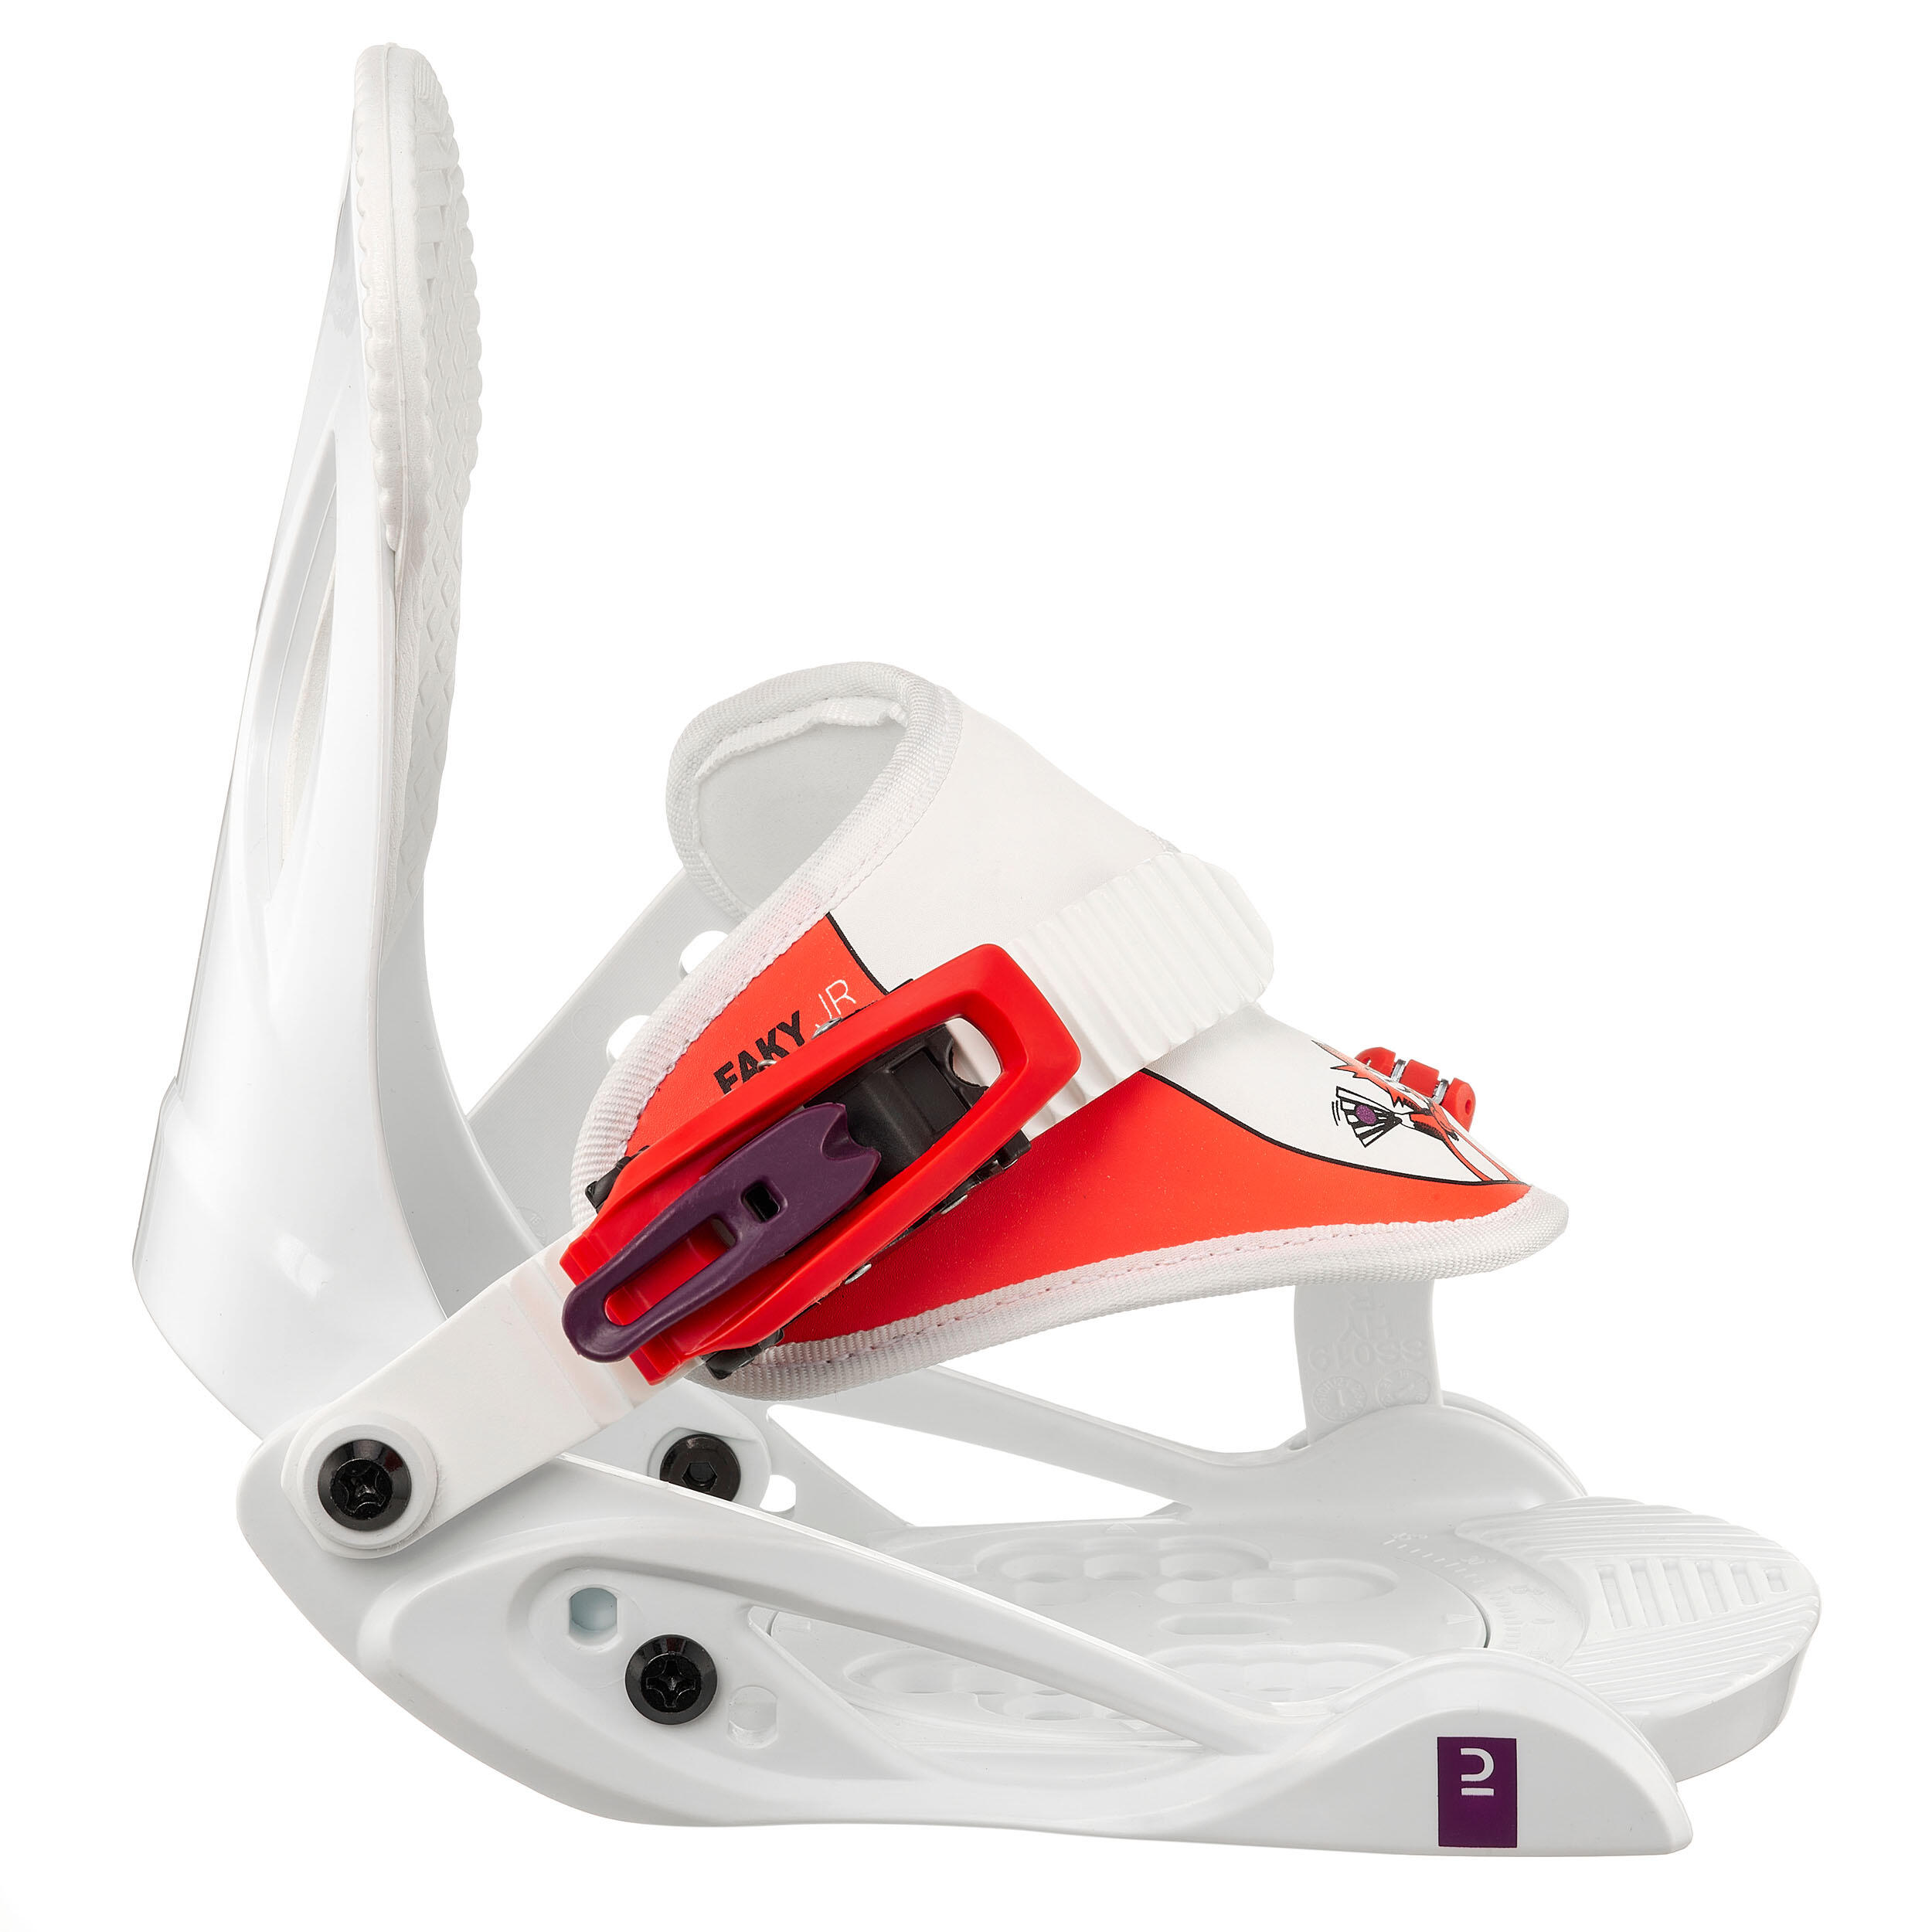 Kids’ Quick Snowboard Bindings  - Faky XS - White and Red 2/9